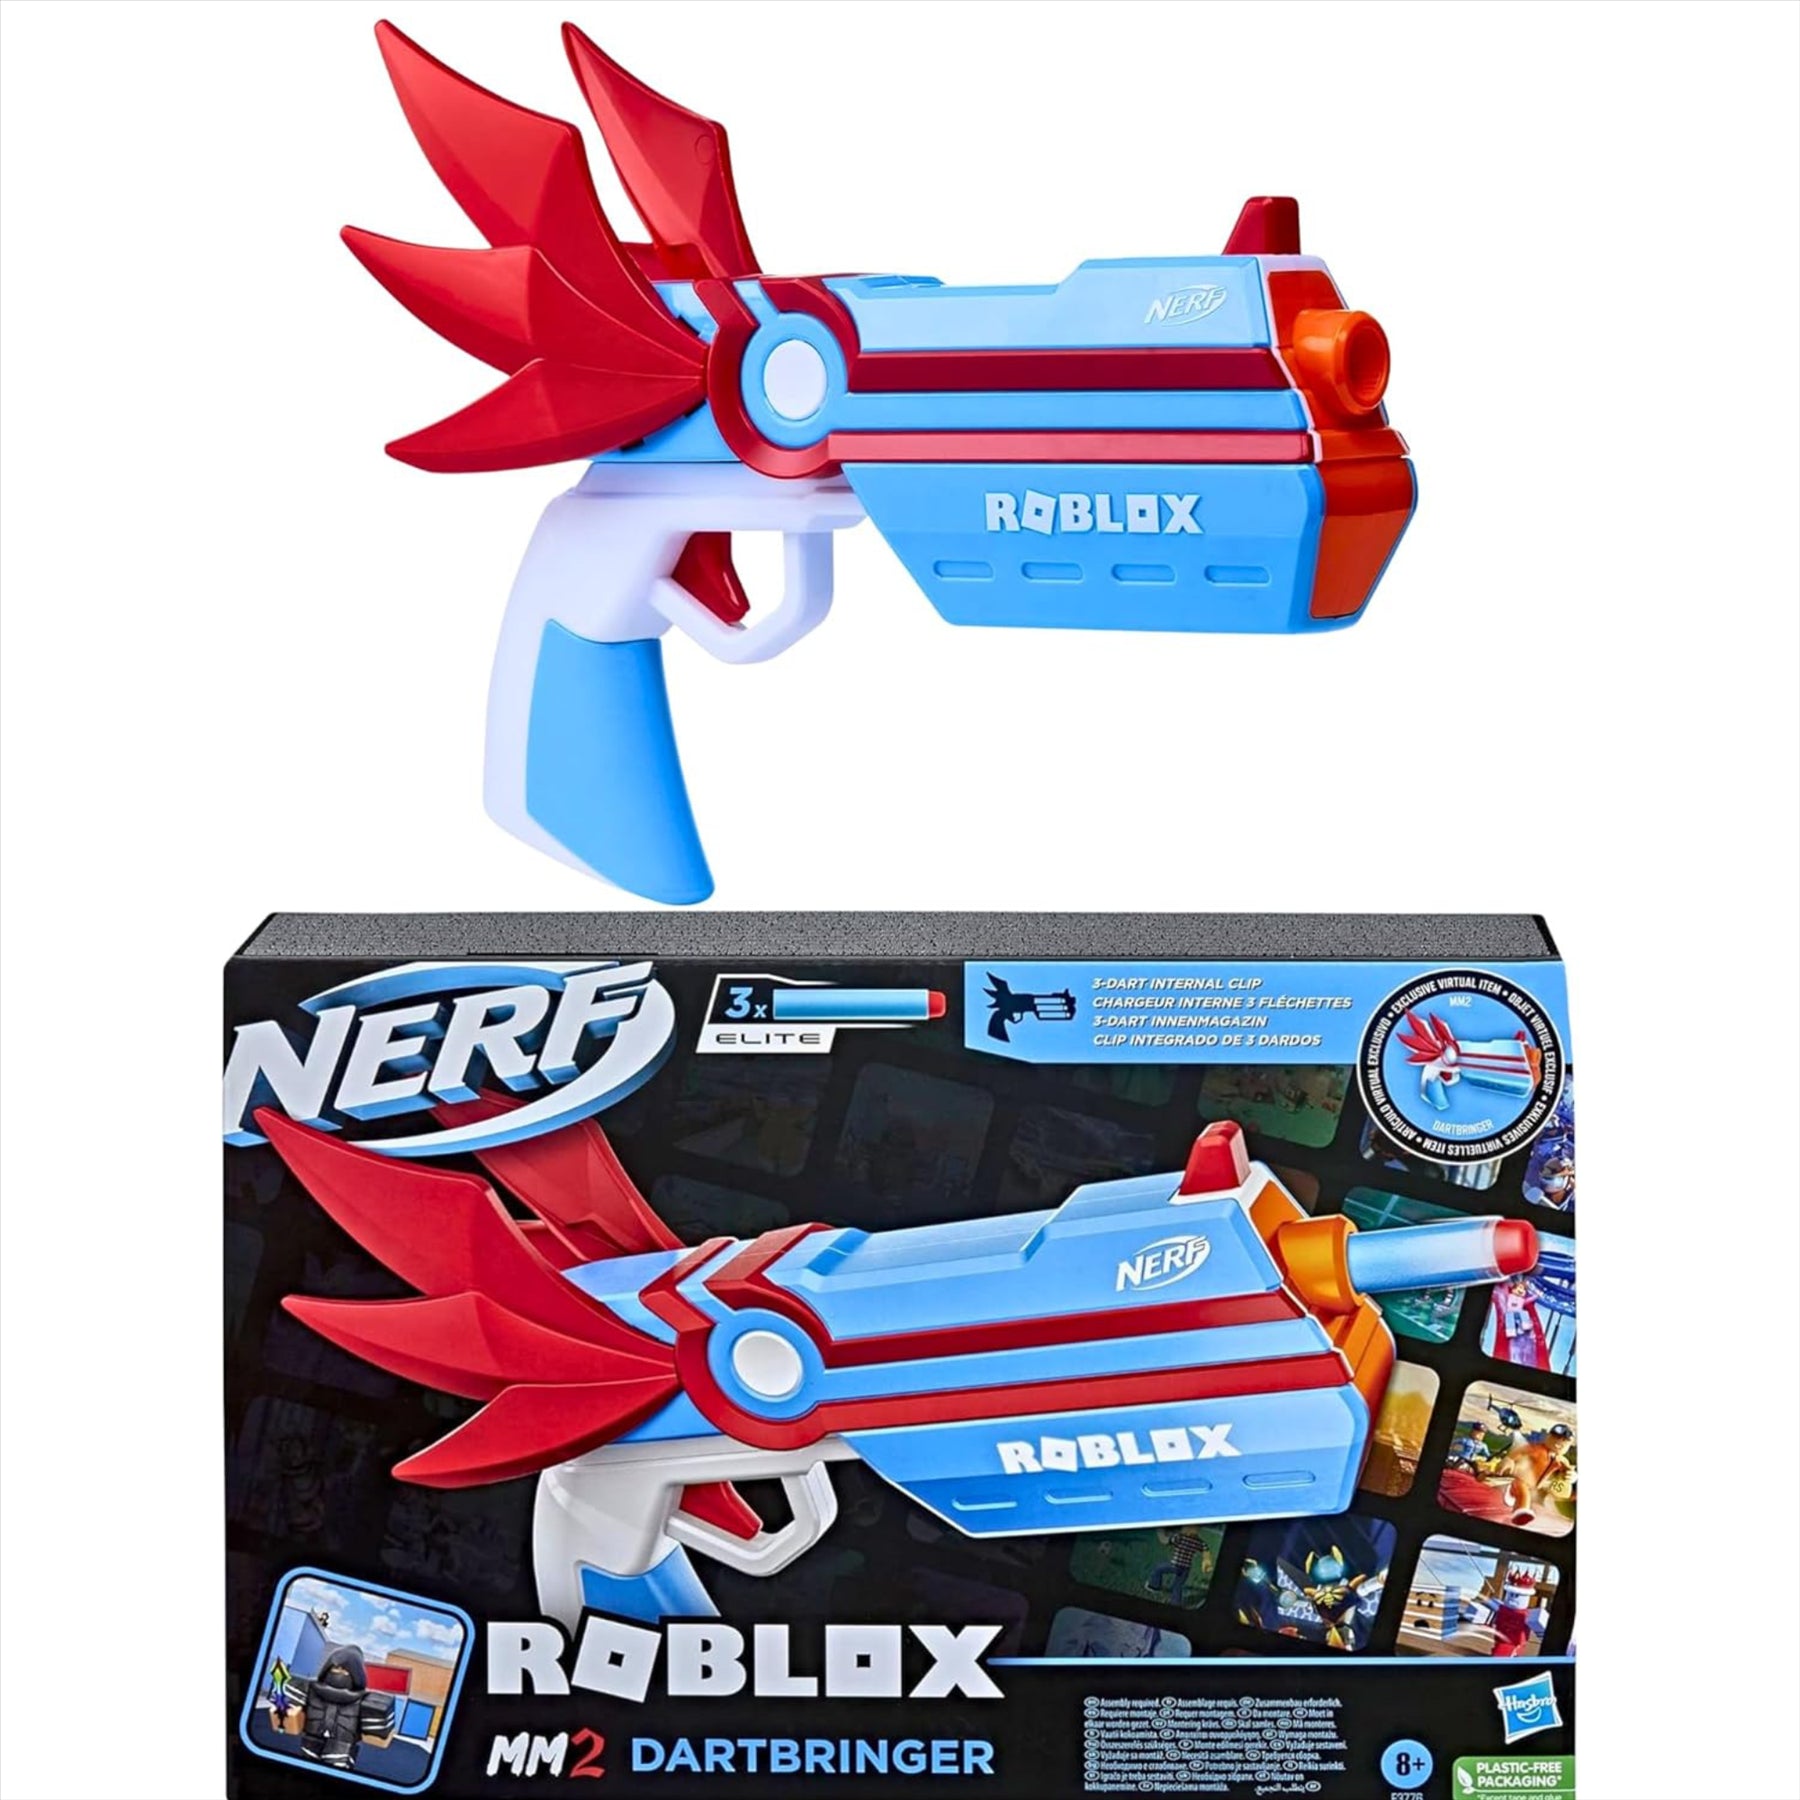 Ultimate Nerf Bundle - Roblox Dartbringer M2 Gun With Exclusive Code, Nerf Collectible Blind Bag Disc Launchers & Blaster Clip Charms Set - Gun and 6 Blind Bags - Toptoys2u